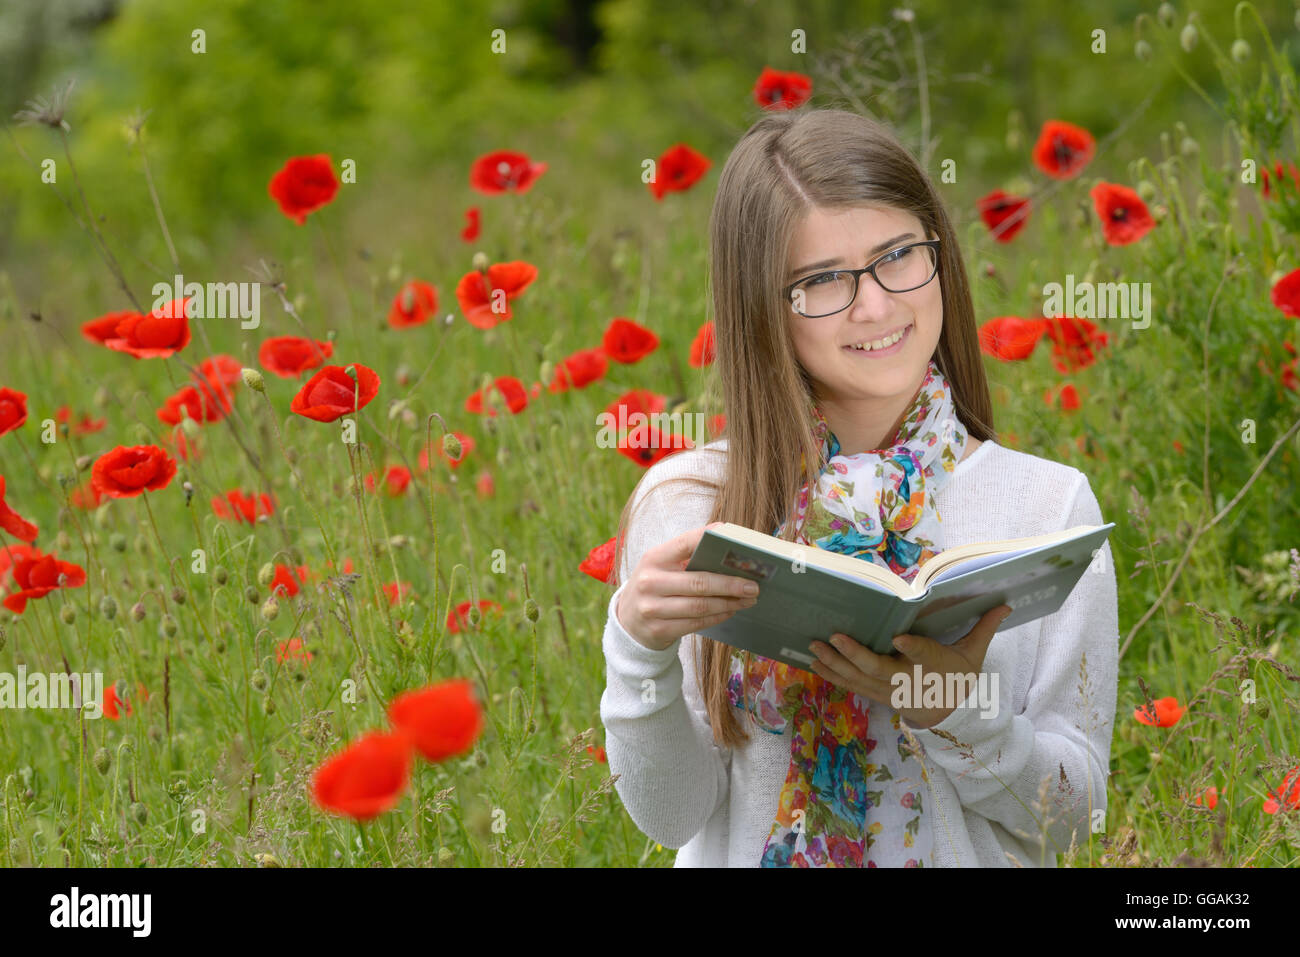 Girl reading a book in nature Banque D'Images